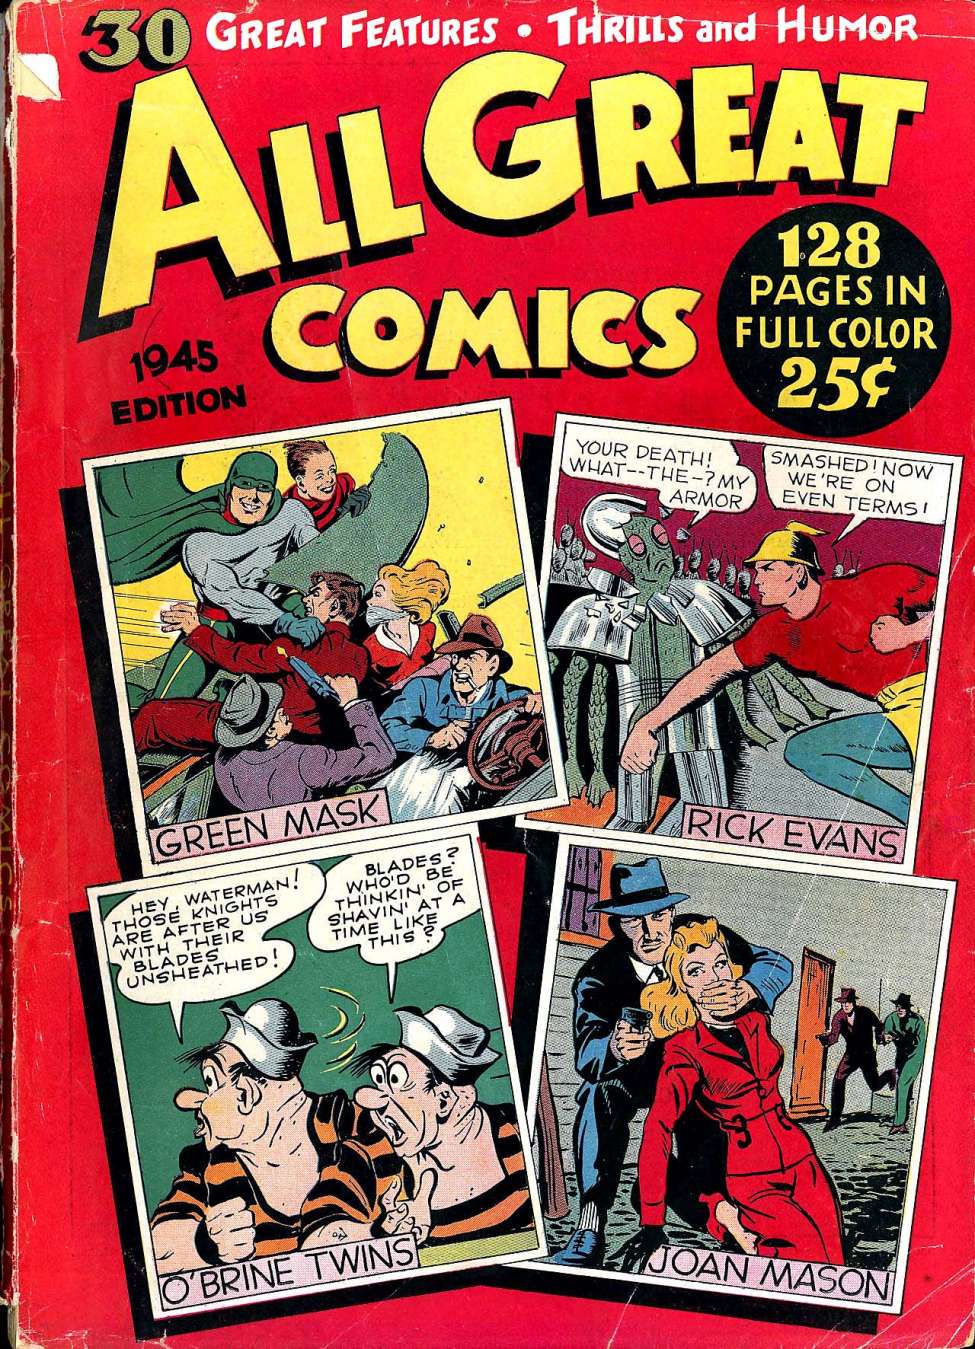 Book Cover For All Great Comics 1945 pt1 - Version 1